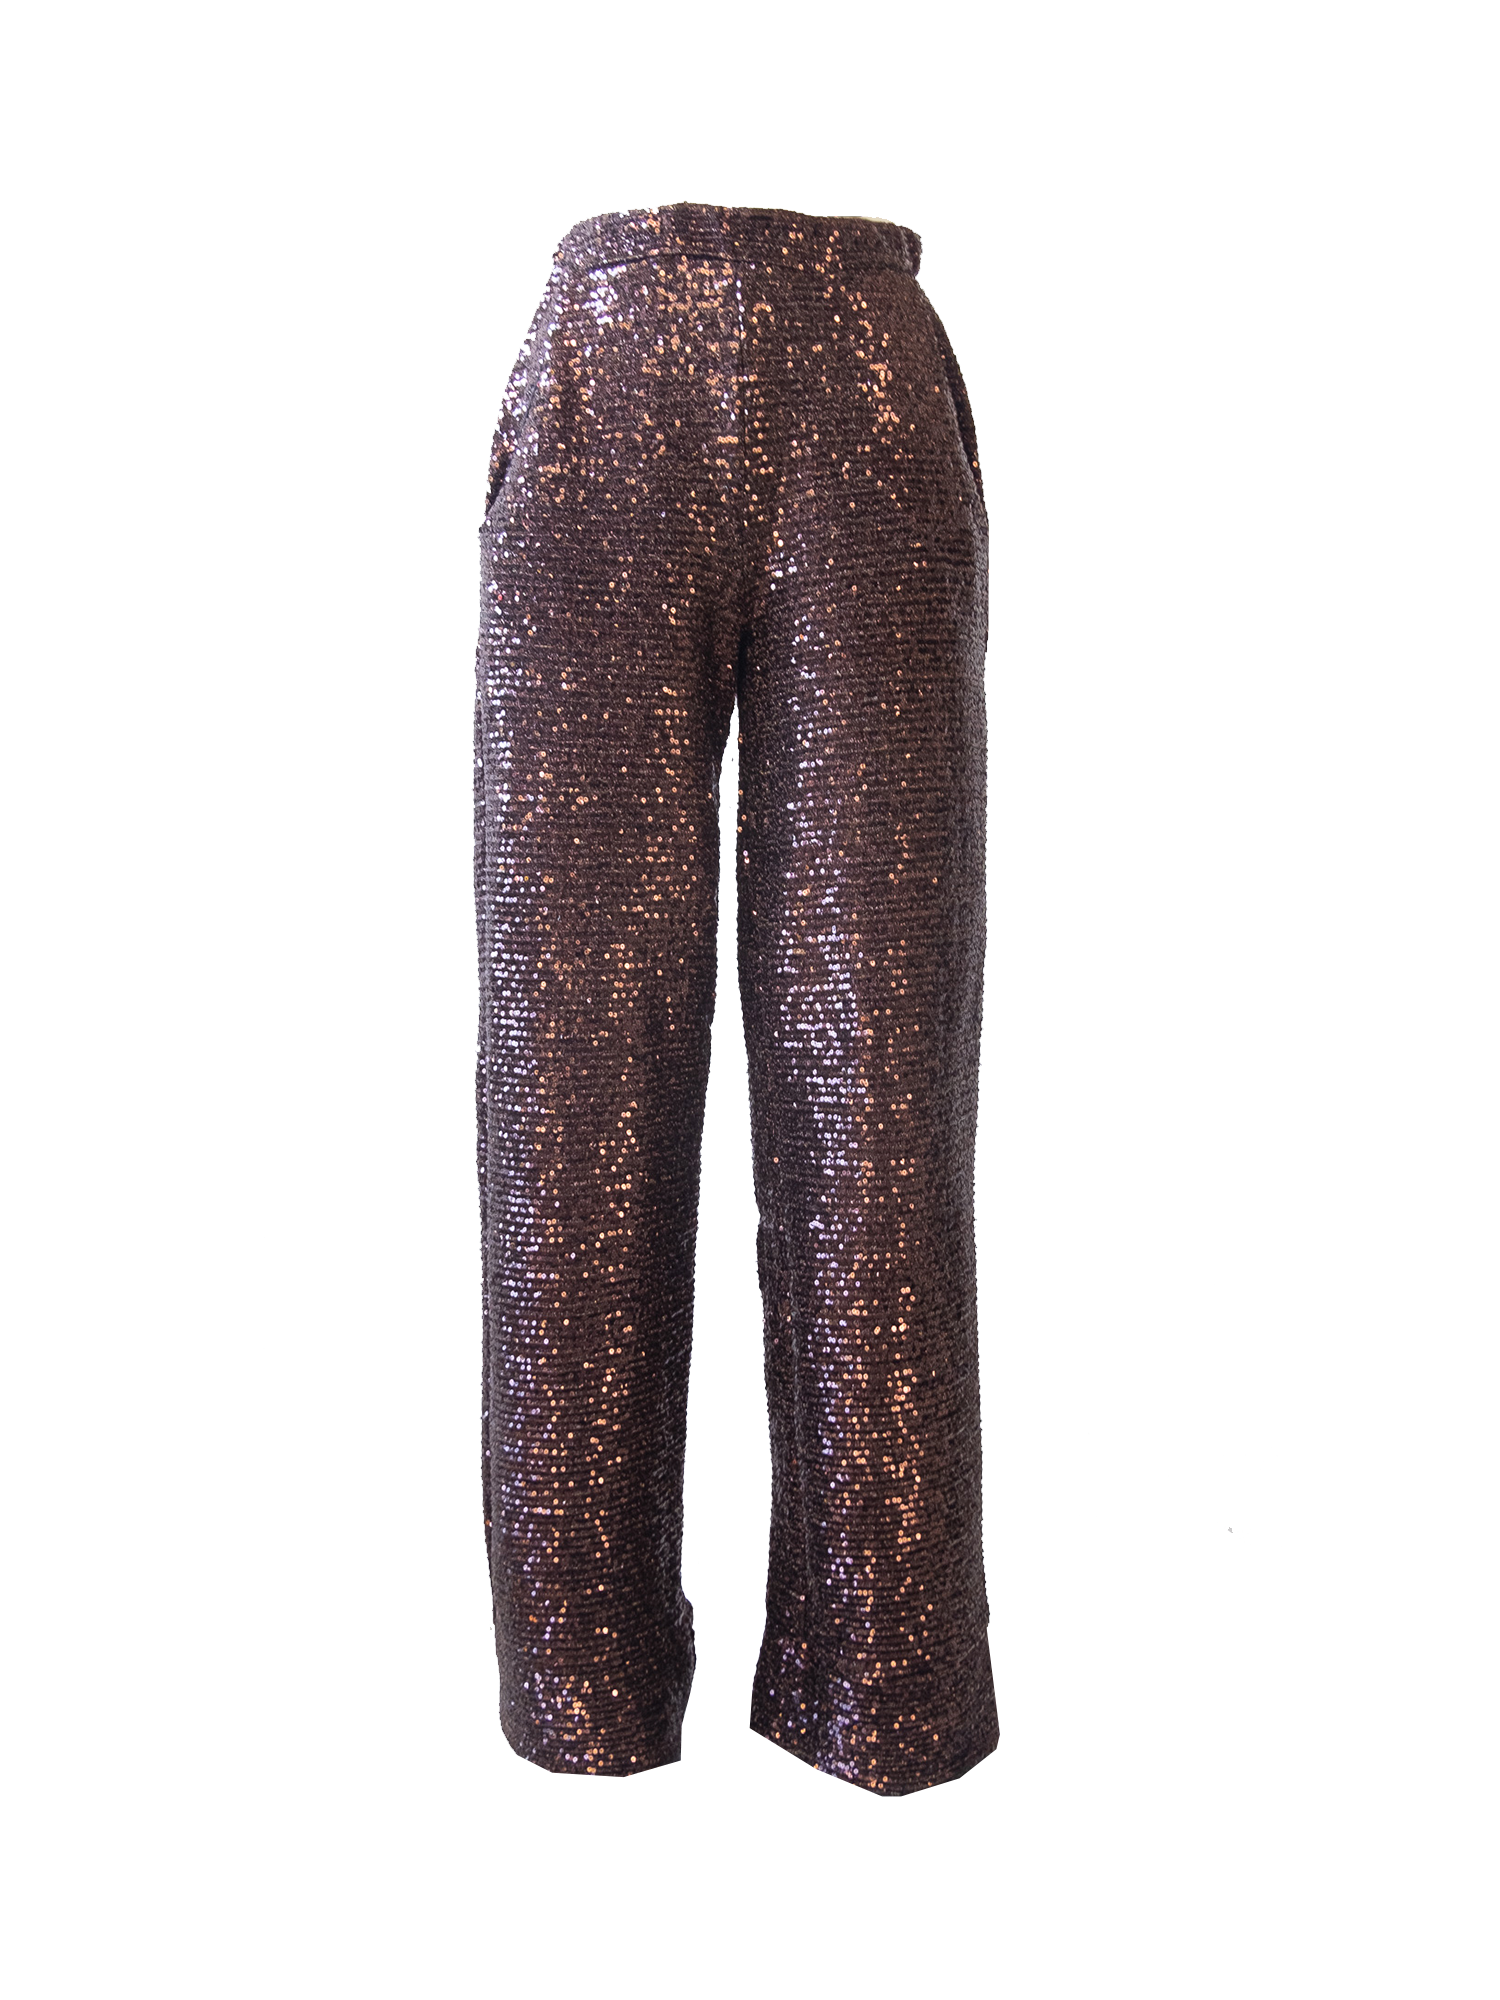 AIDA - palazzo trousers with side pockets in brown sequin